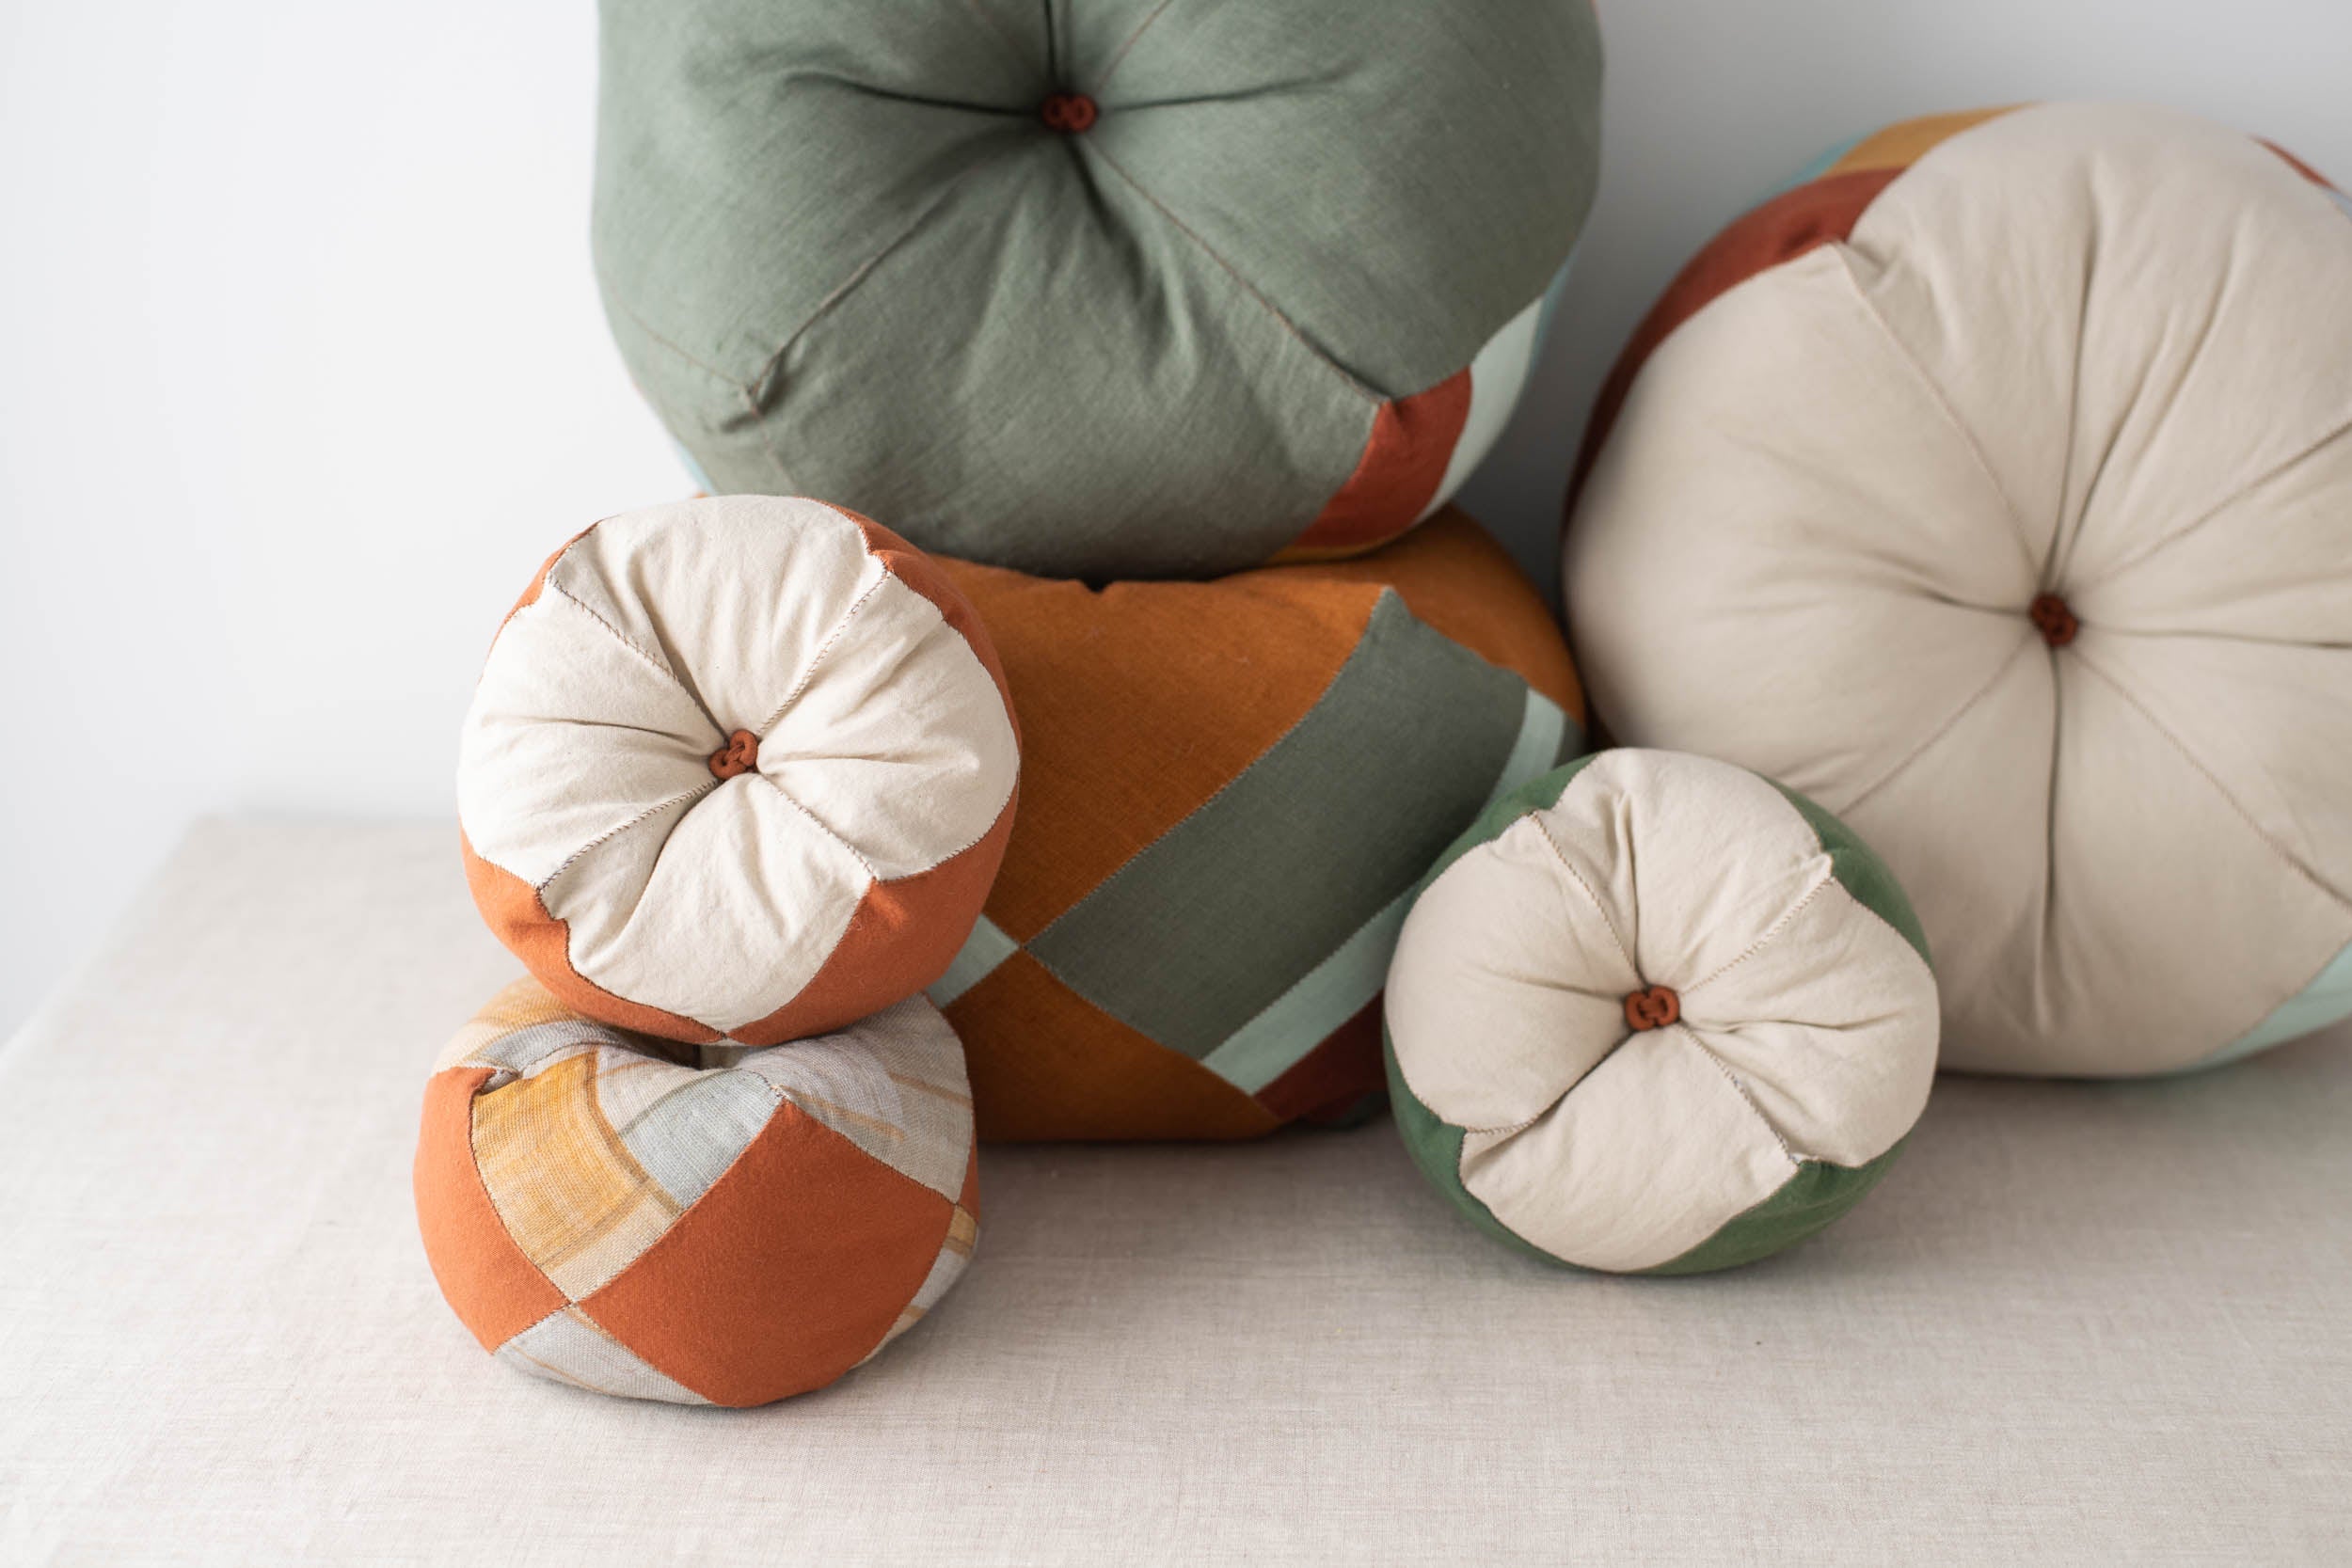 sewn cushions by Youngmin Lee